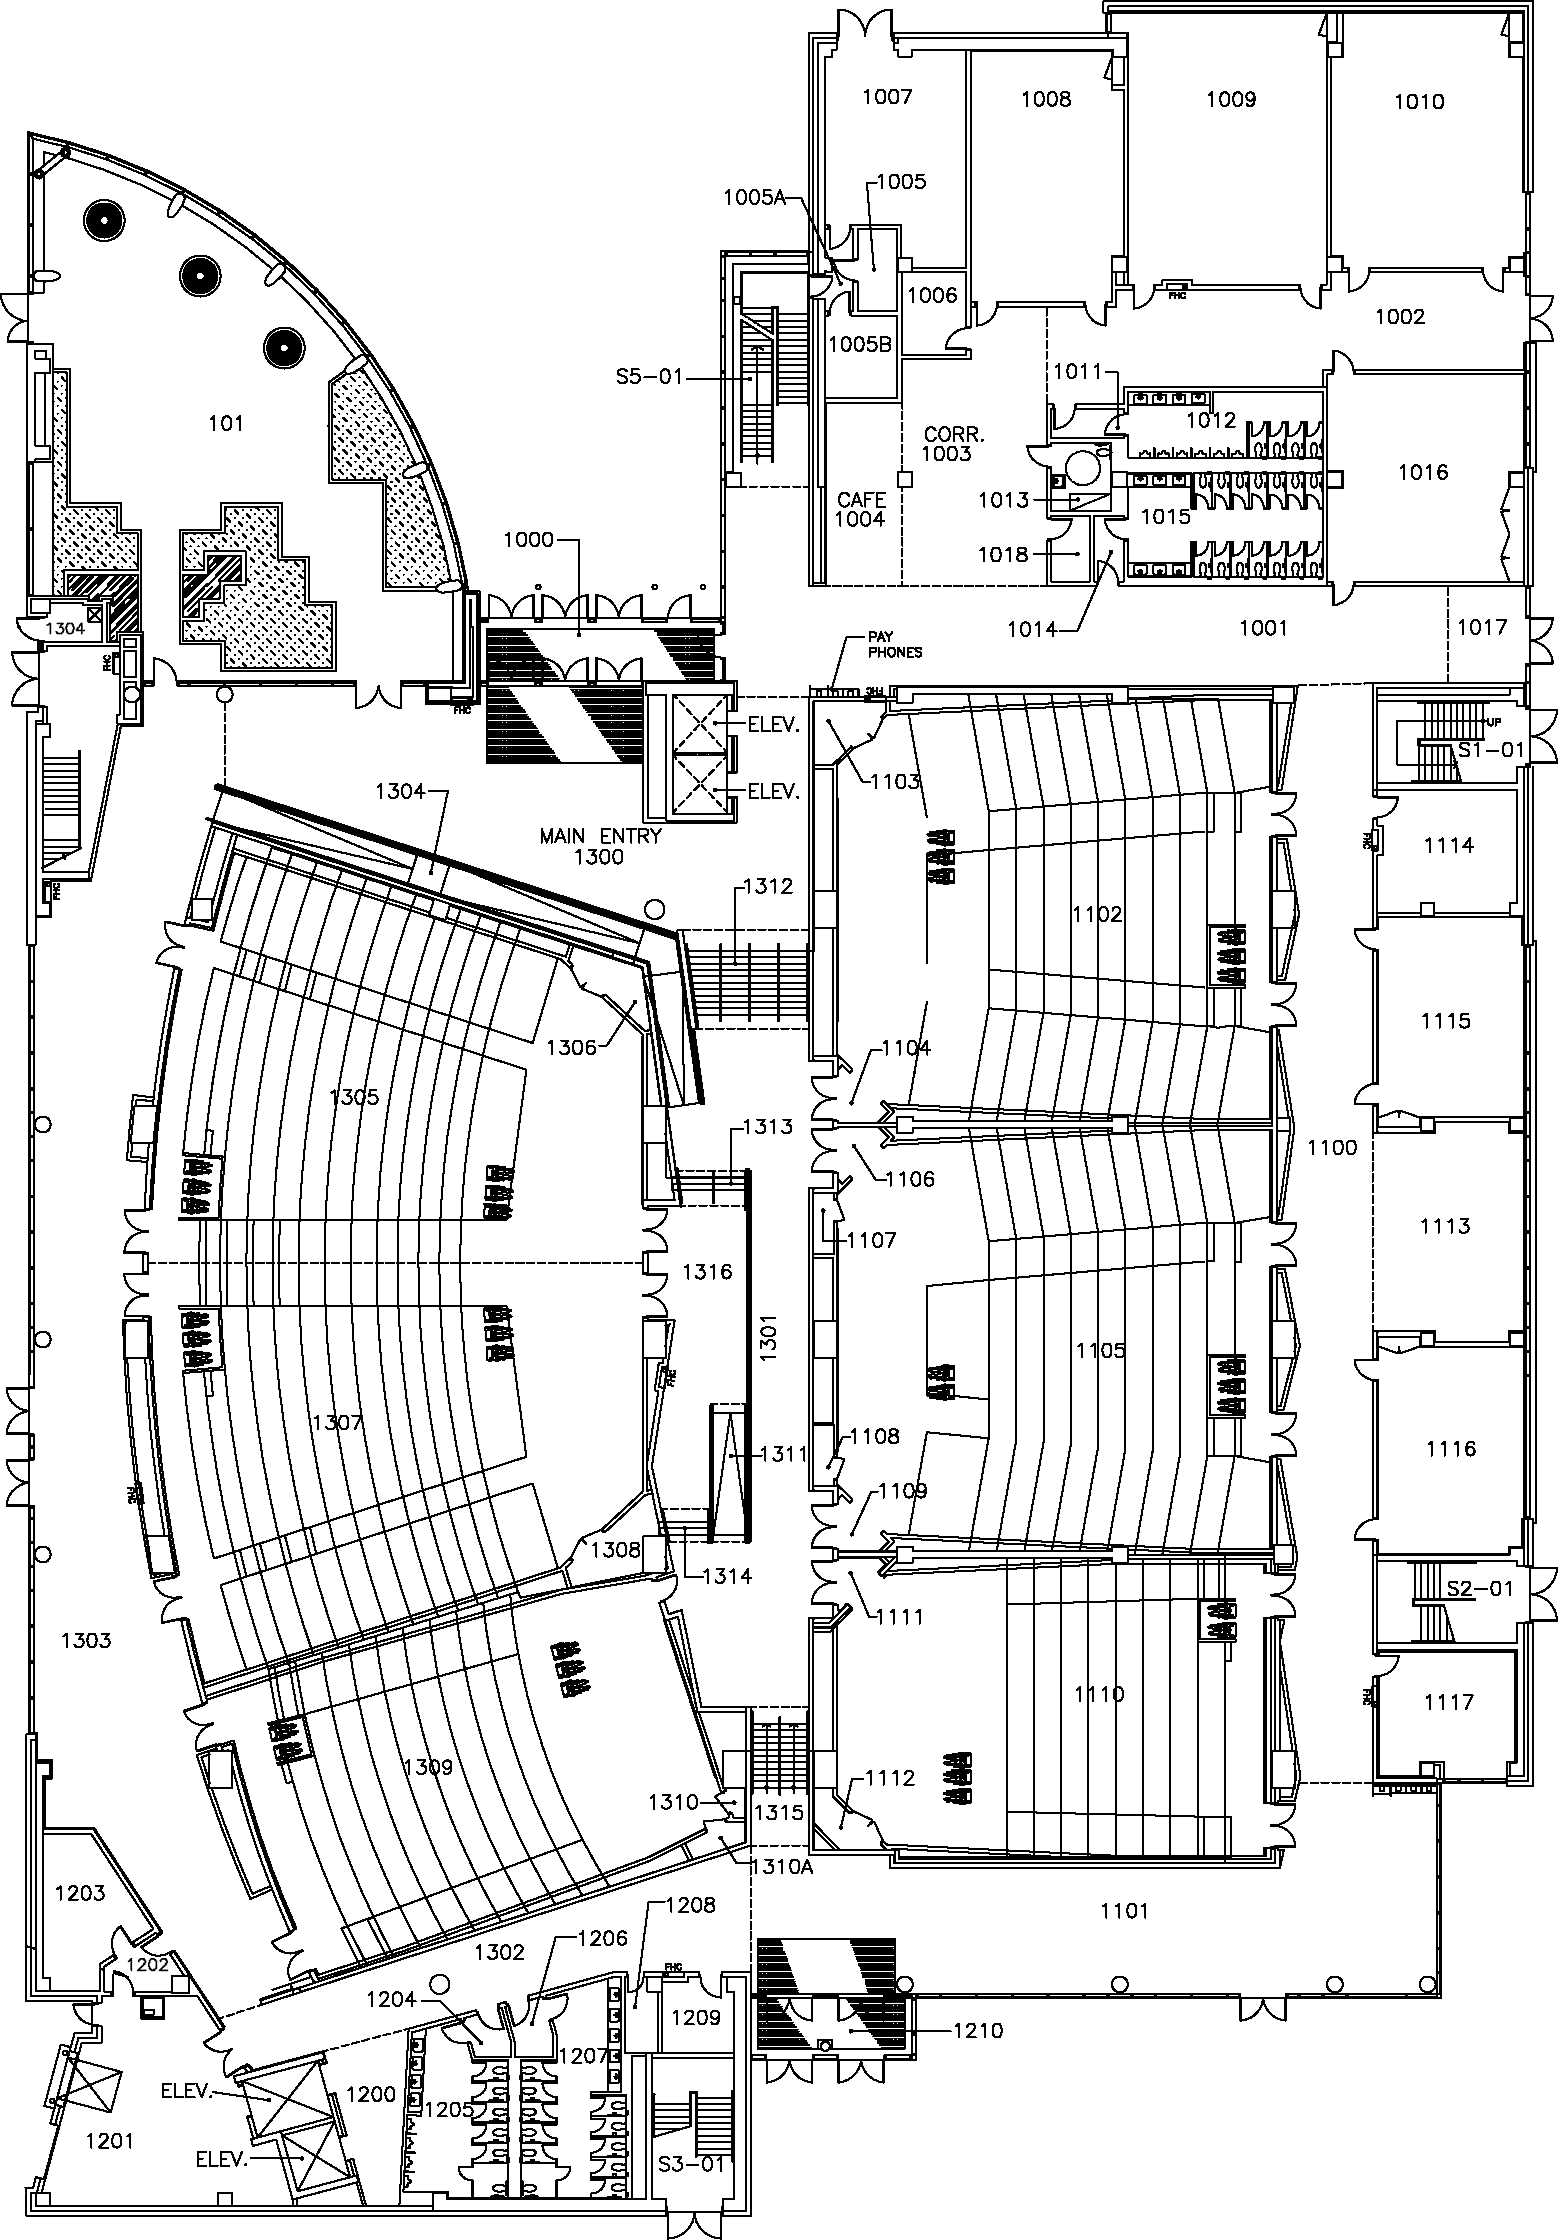 Michael DeGroote Centre for Learning and Discovery (MDCL) - First Floor Map